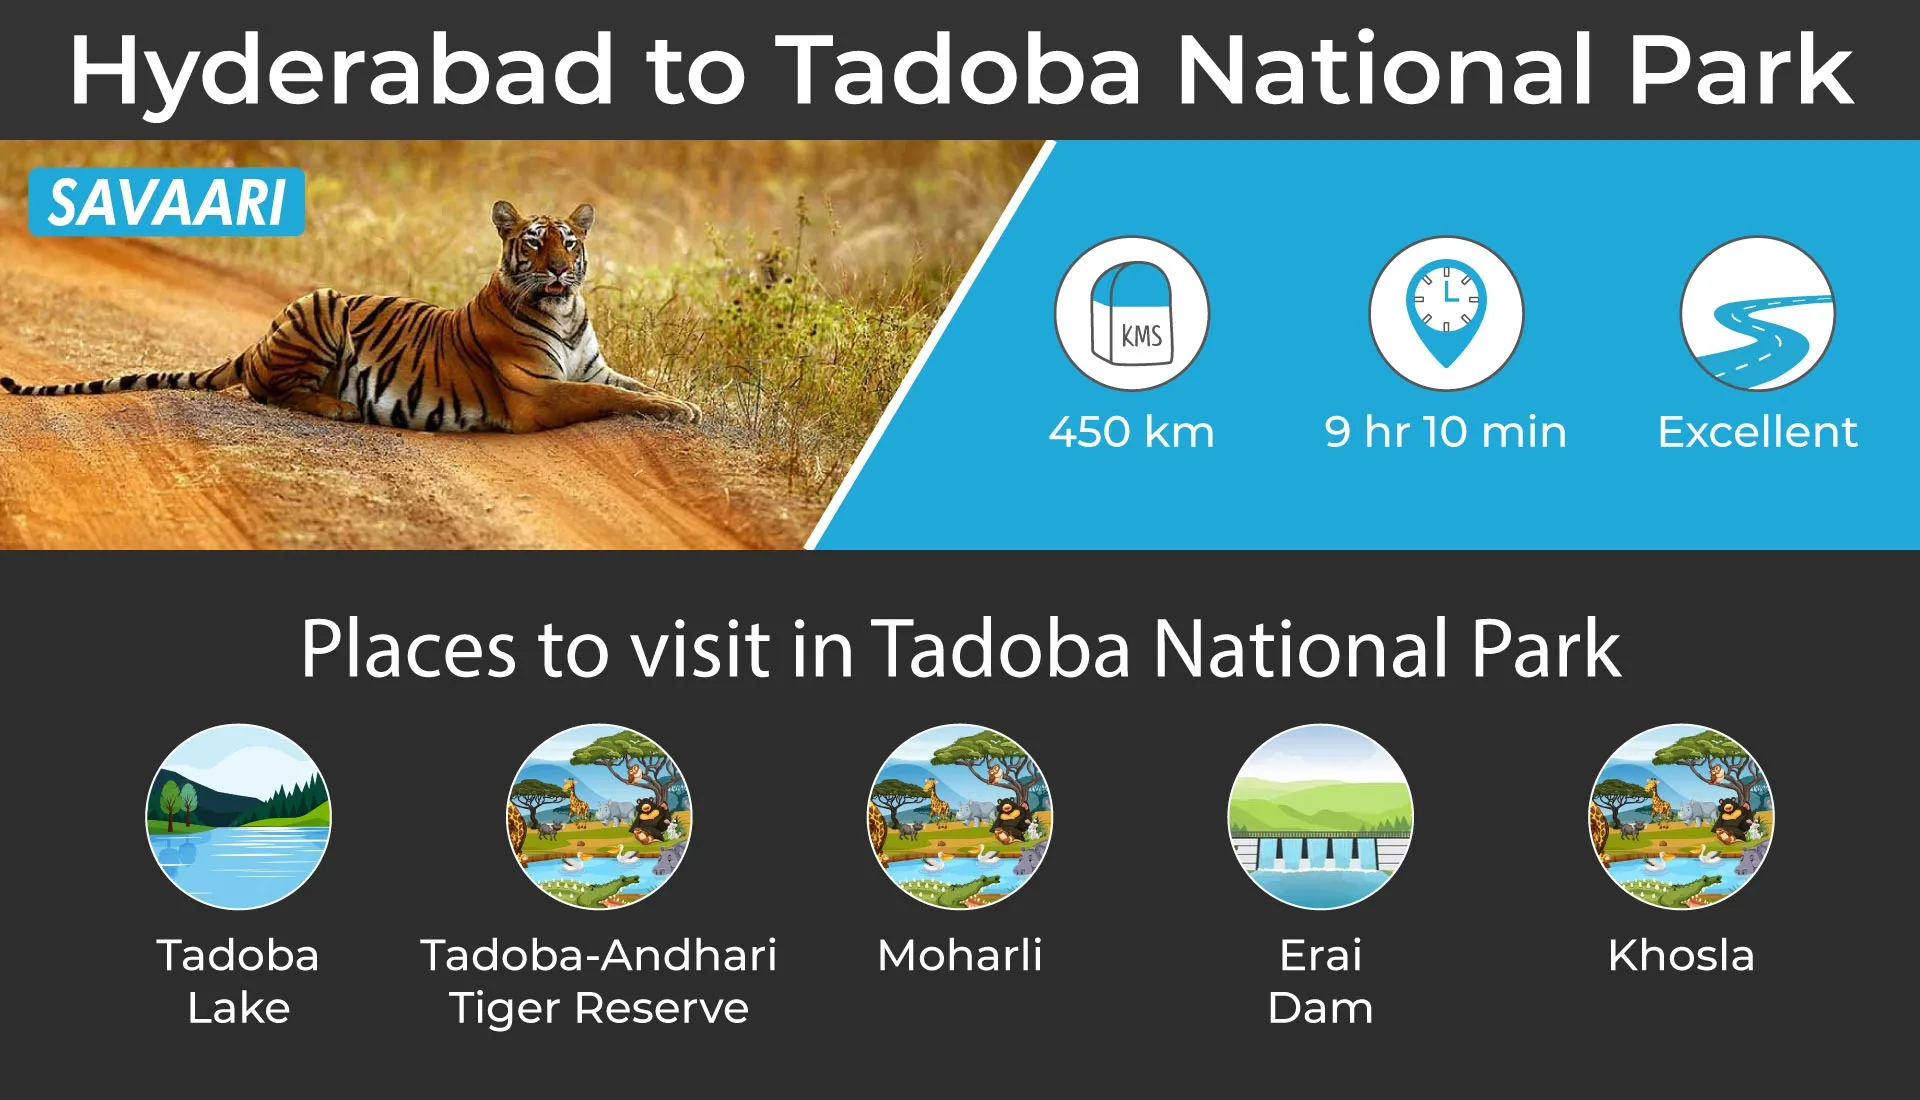 Hyderabad to Tadoba National park by road